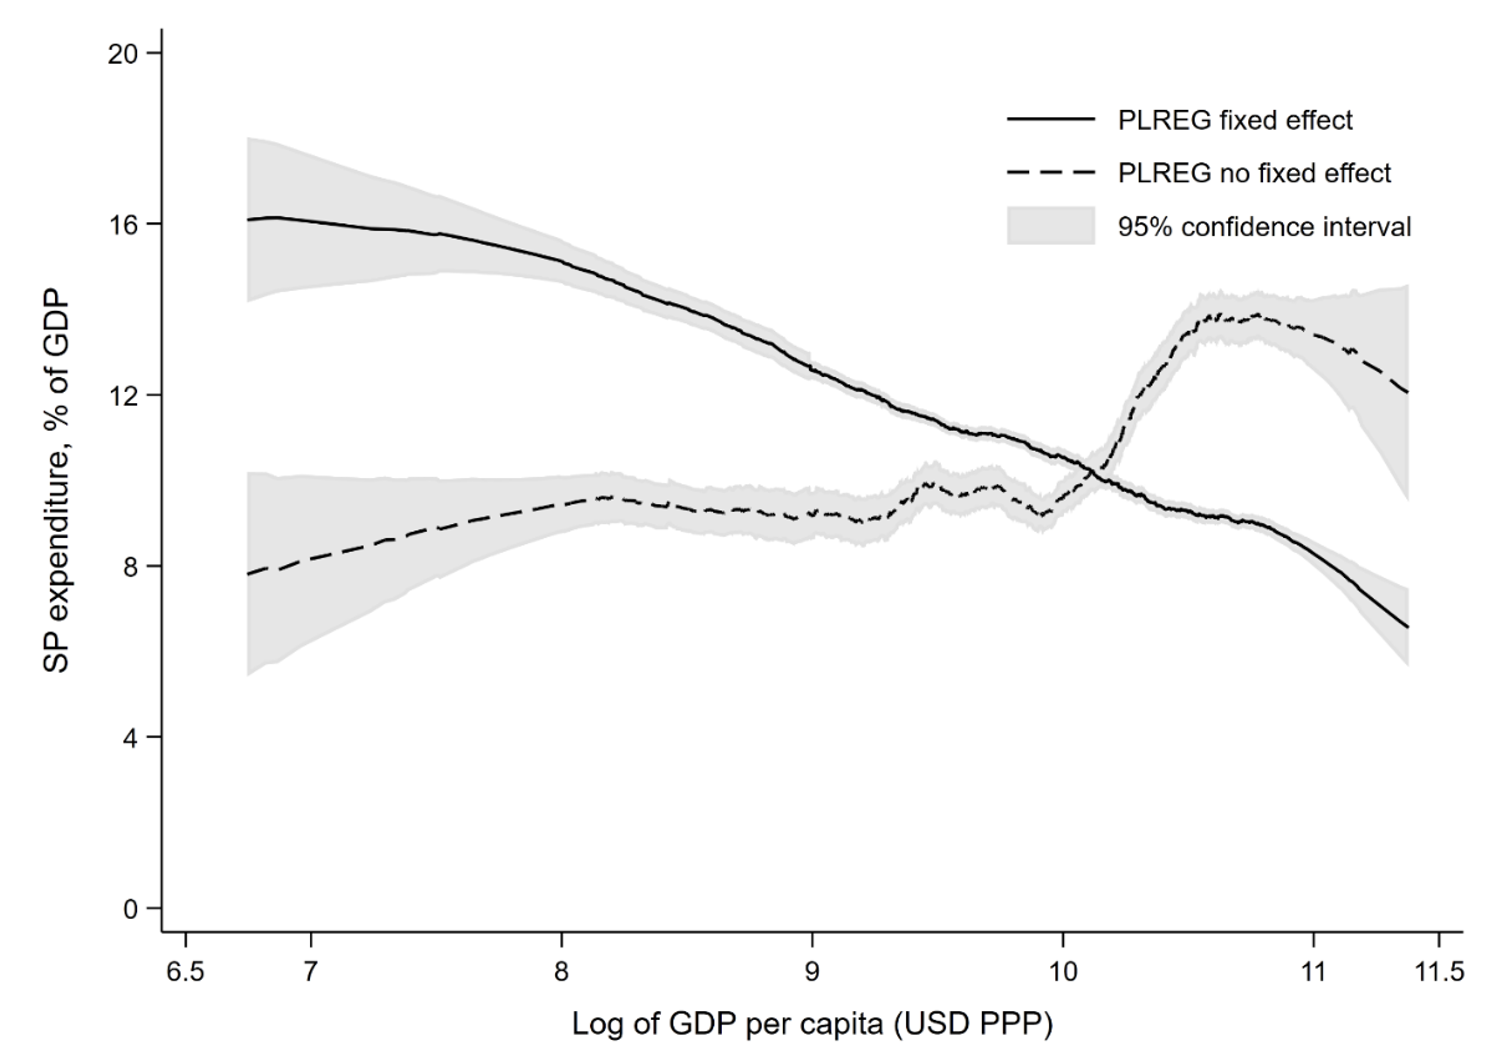 Figure 2 Nonparametric relationship between social protection and income, pooling countries and years with and without country fixed effects and controlling for time-varying covariates